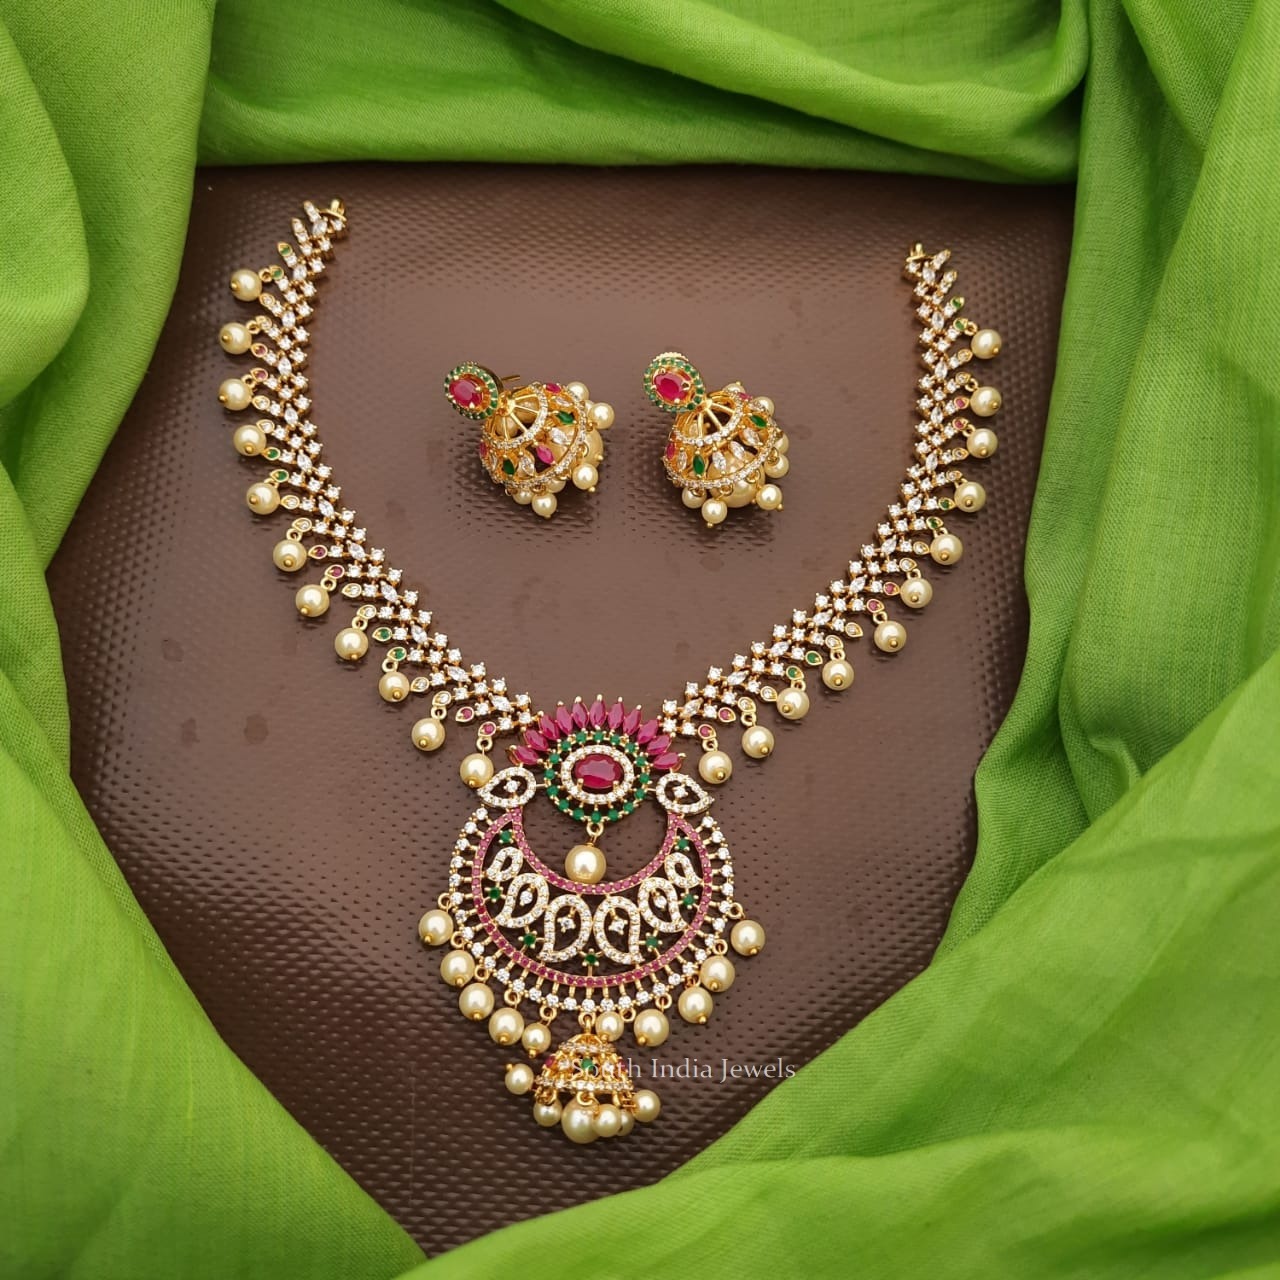 CZ necklace online with mango design and pearls - Swarnakshi Jewelry